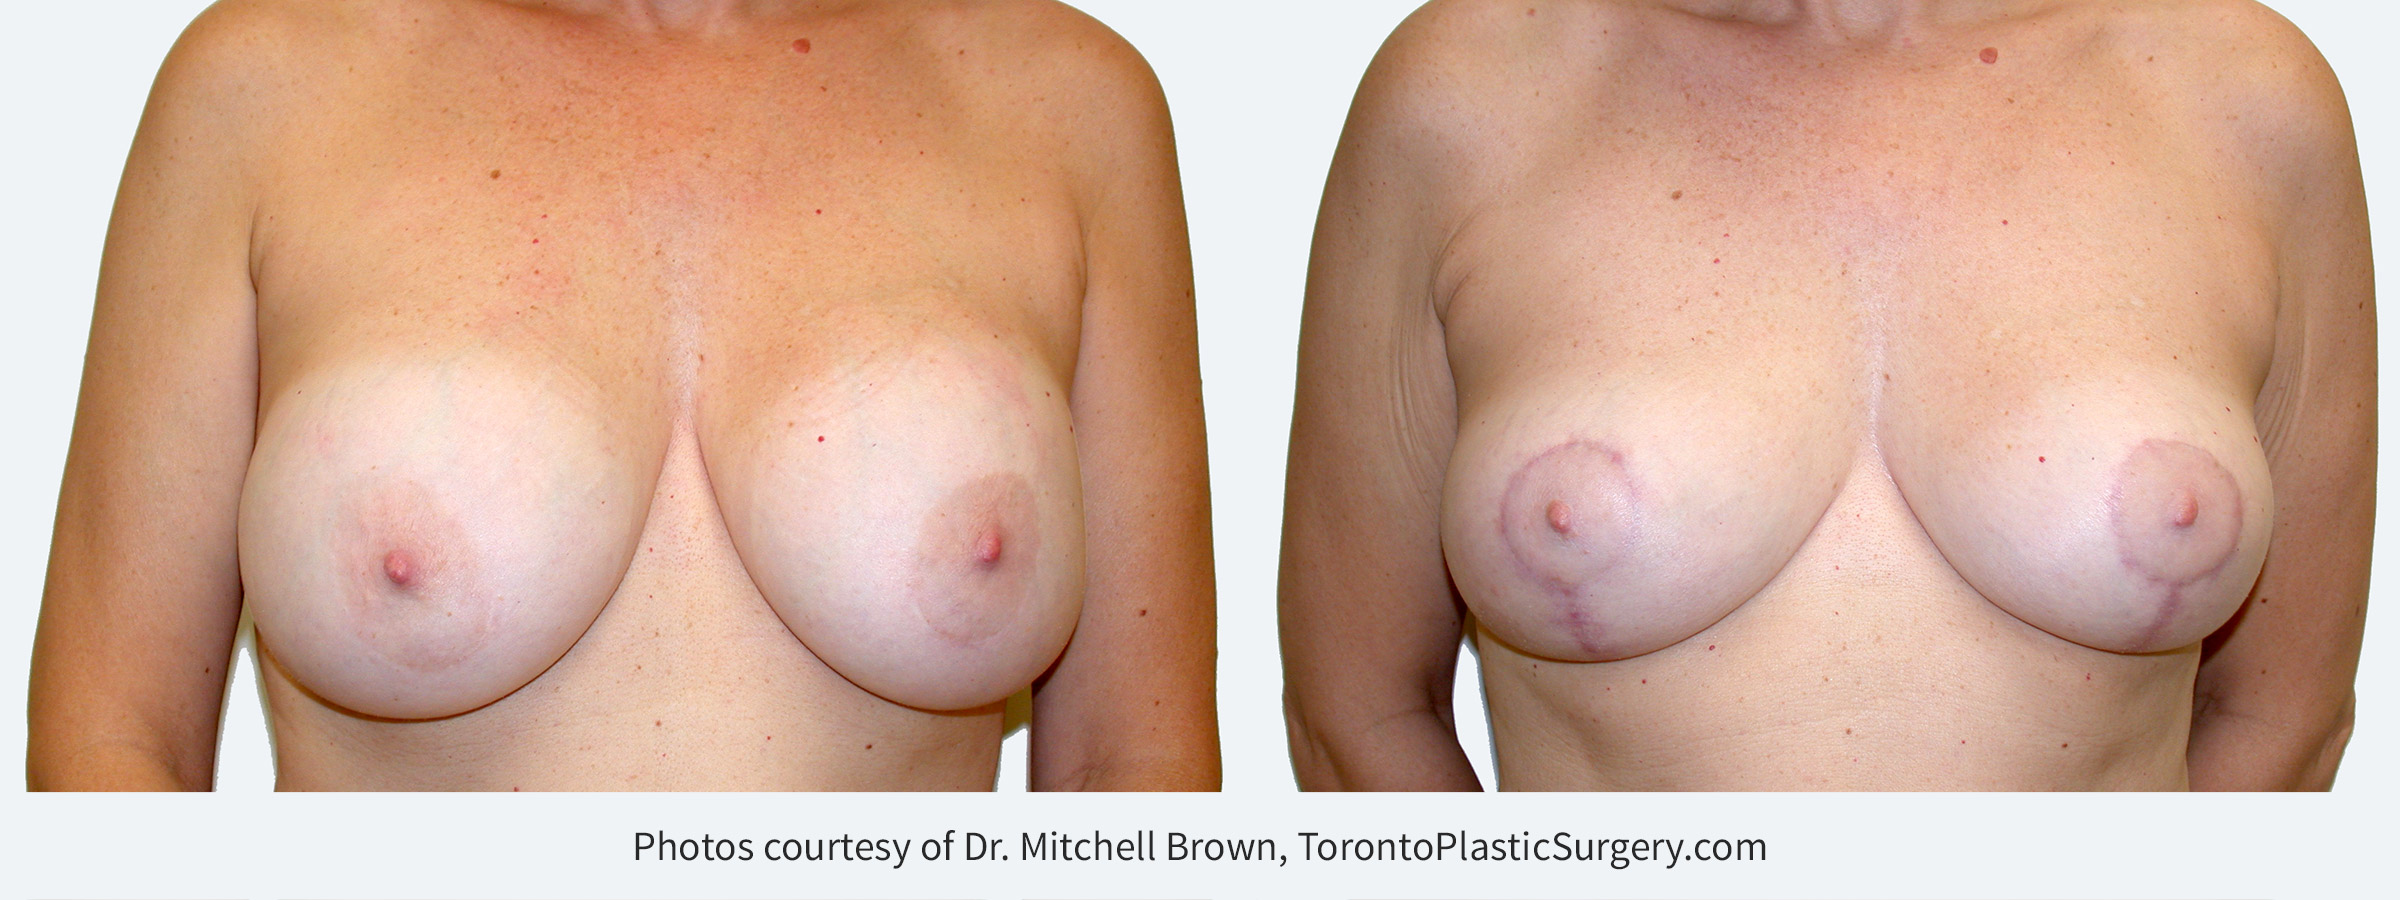 Recurrent capsular contracture treated with implant removal and reshaping of the breasts with a breast lift and fat grafting. Before and 6 months after